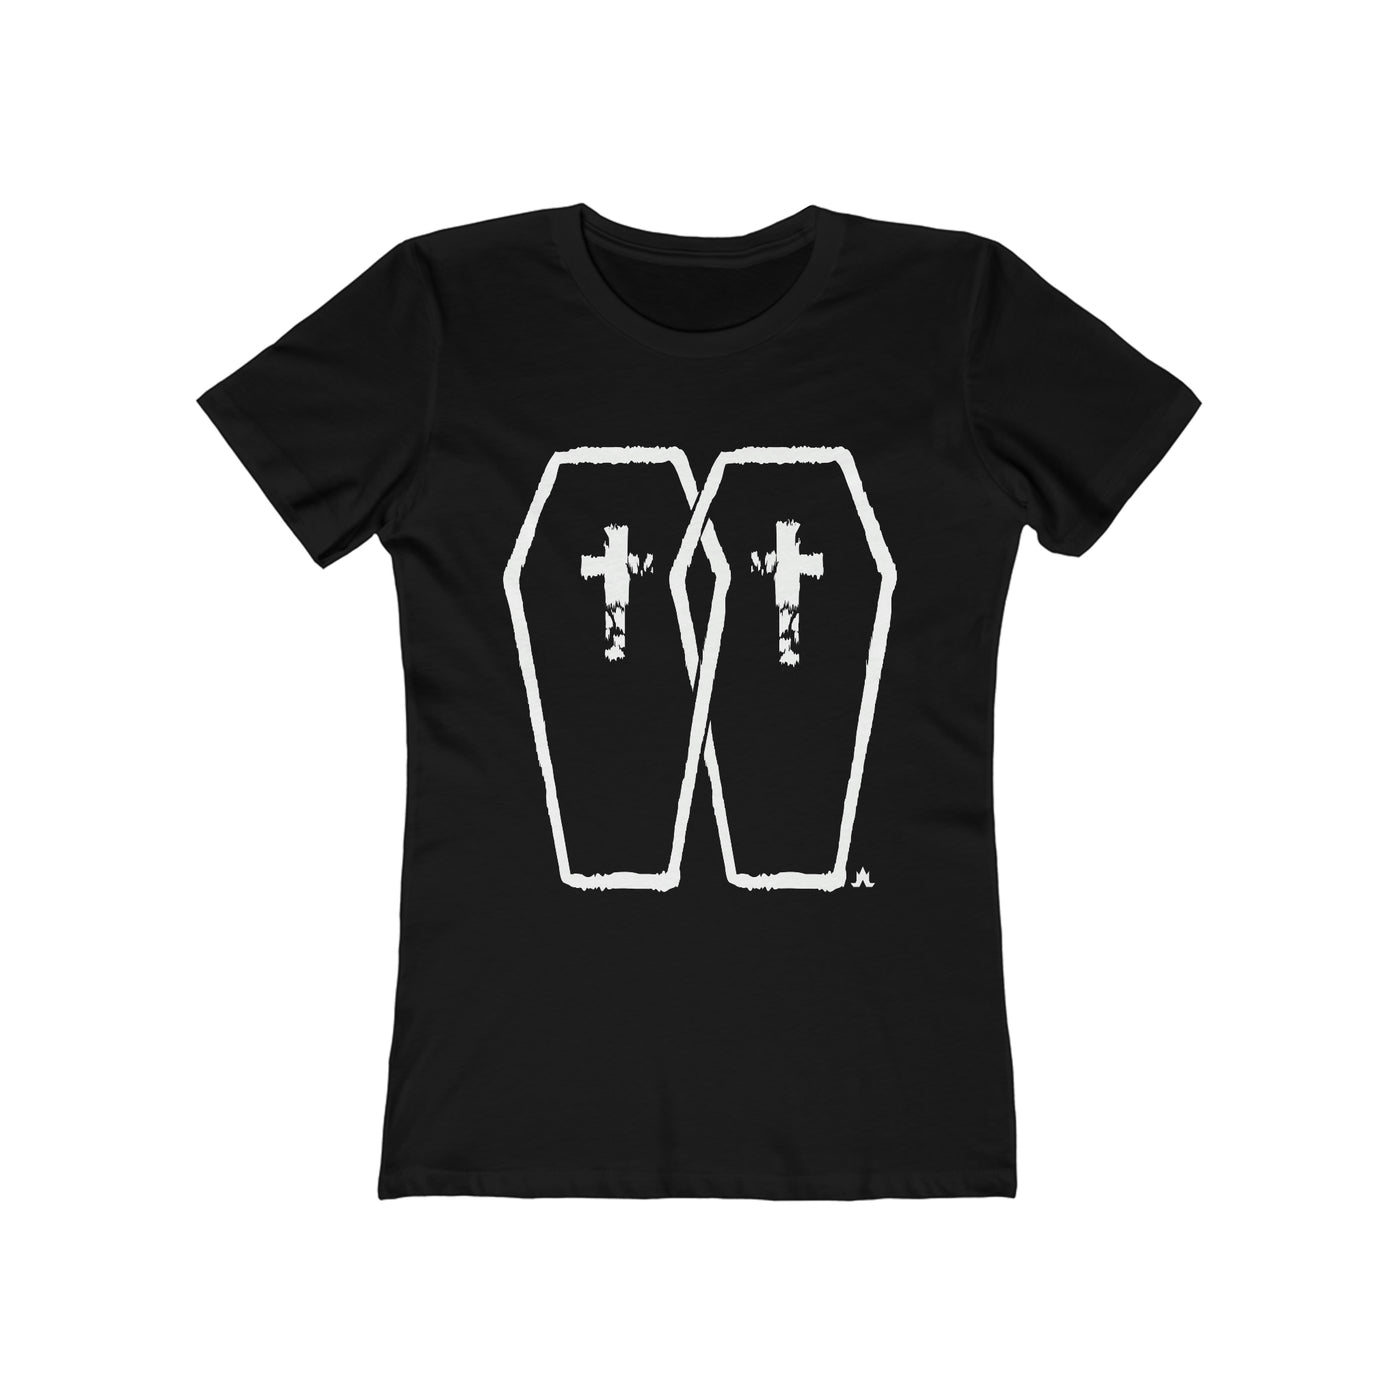 Coffins Are Forever Tee - Women's